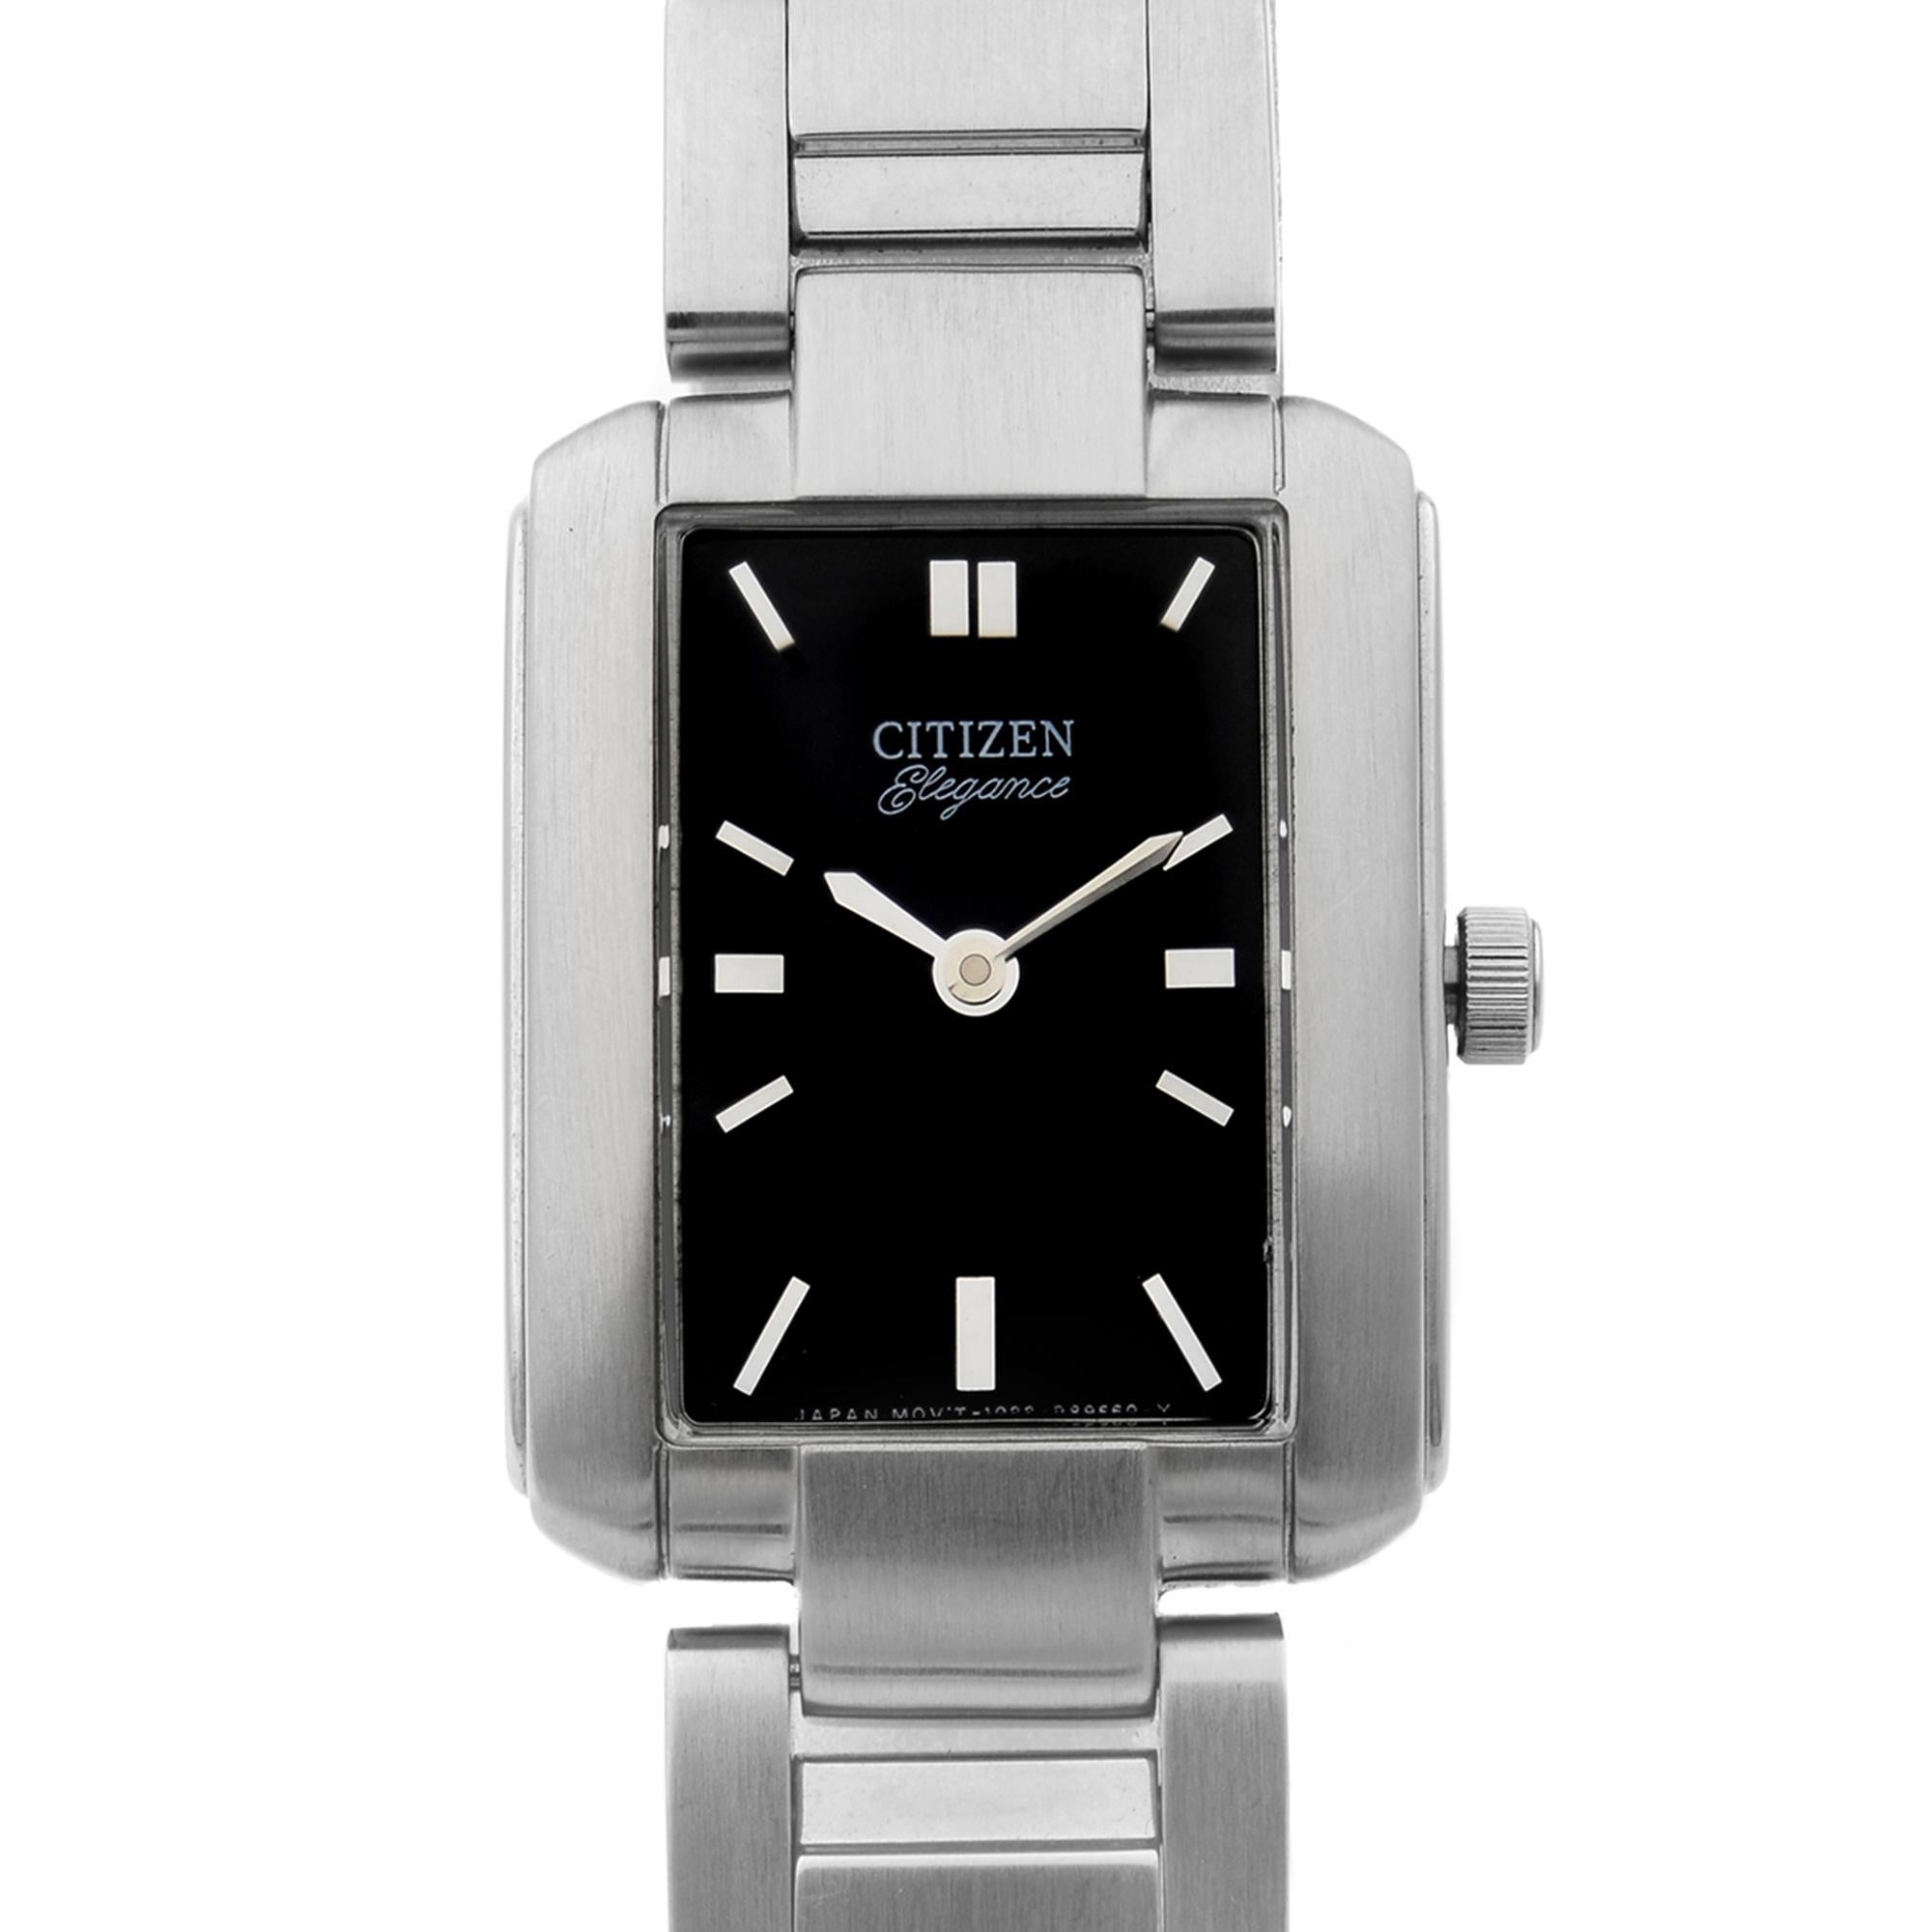 Display Model Citizen Elegance Stainless Steel Black Dial Quartz Ladies Watch 1022-R89560 This Beautiful Timepiece is Powered By Quartz (Battery) Movement and Features: a Stainless Steel Case and Bracelet, Fixed Stainless Steel Bezel, Black Dial